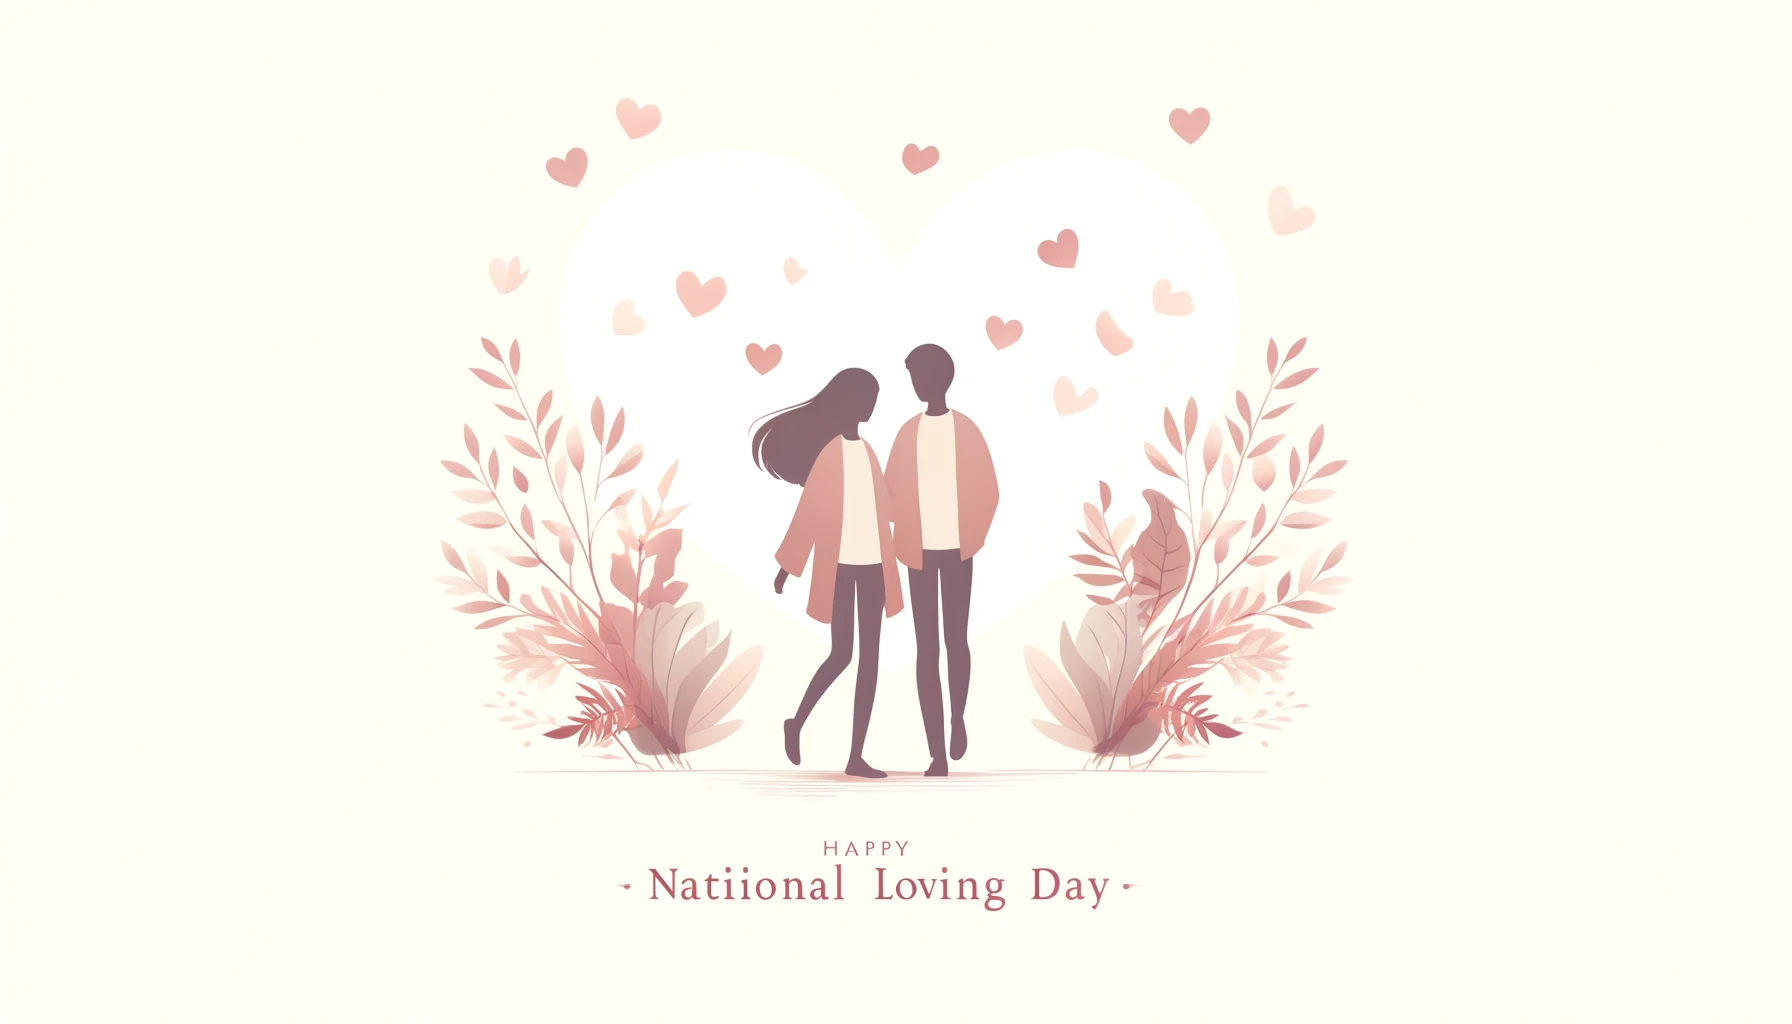 Messages of Love and Equality on National Loving Day